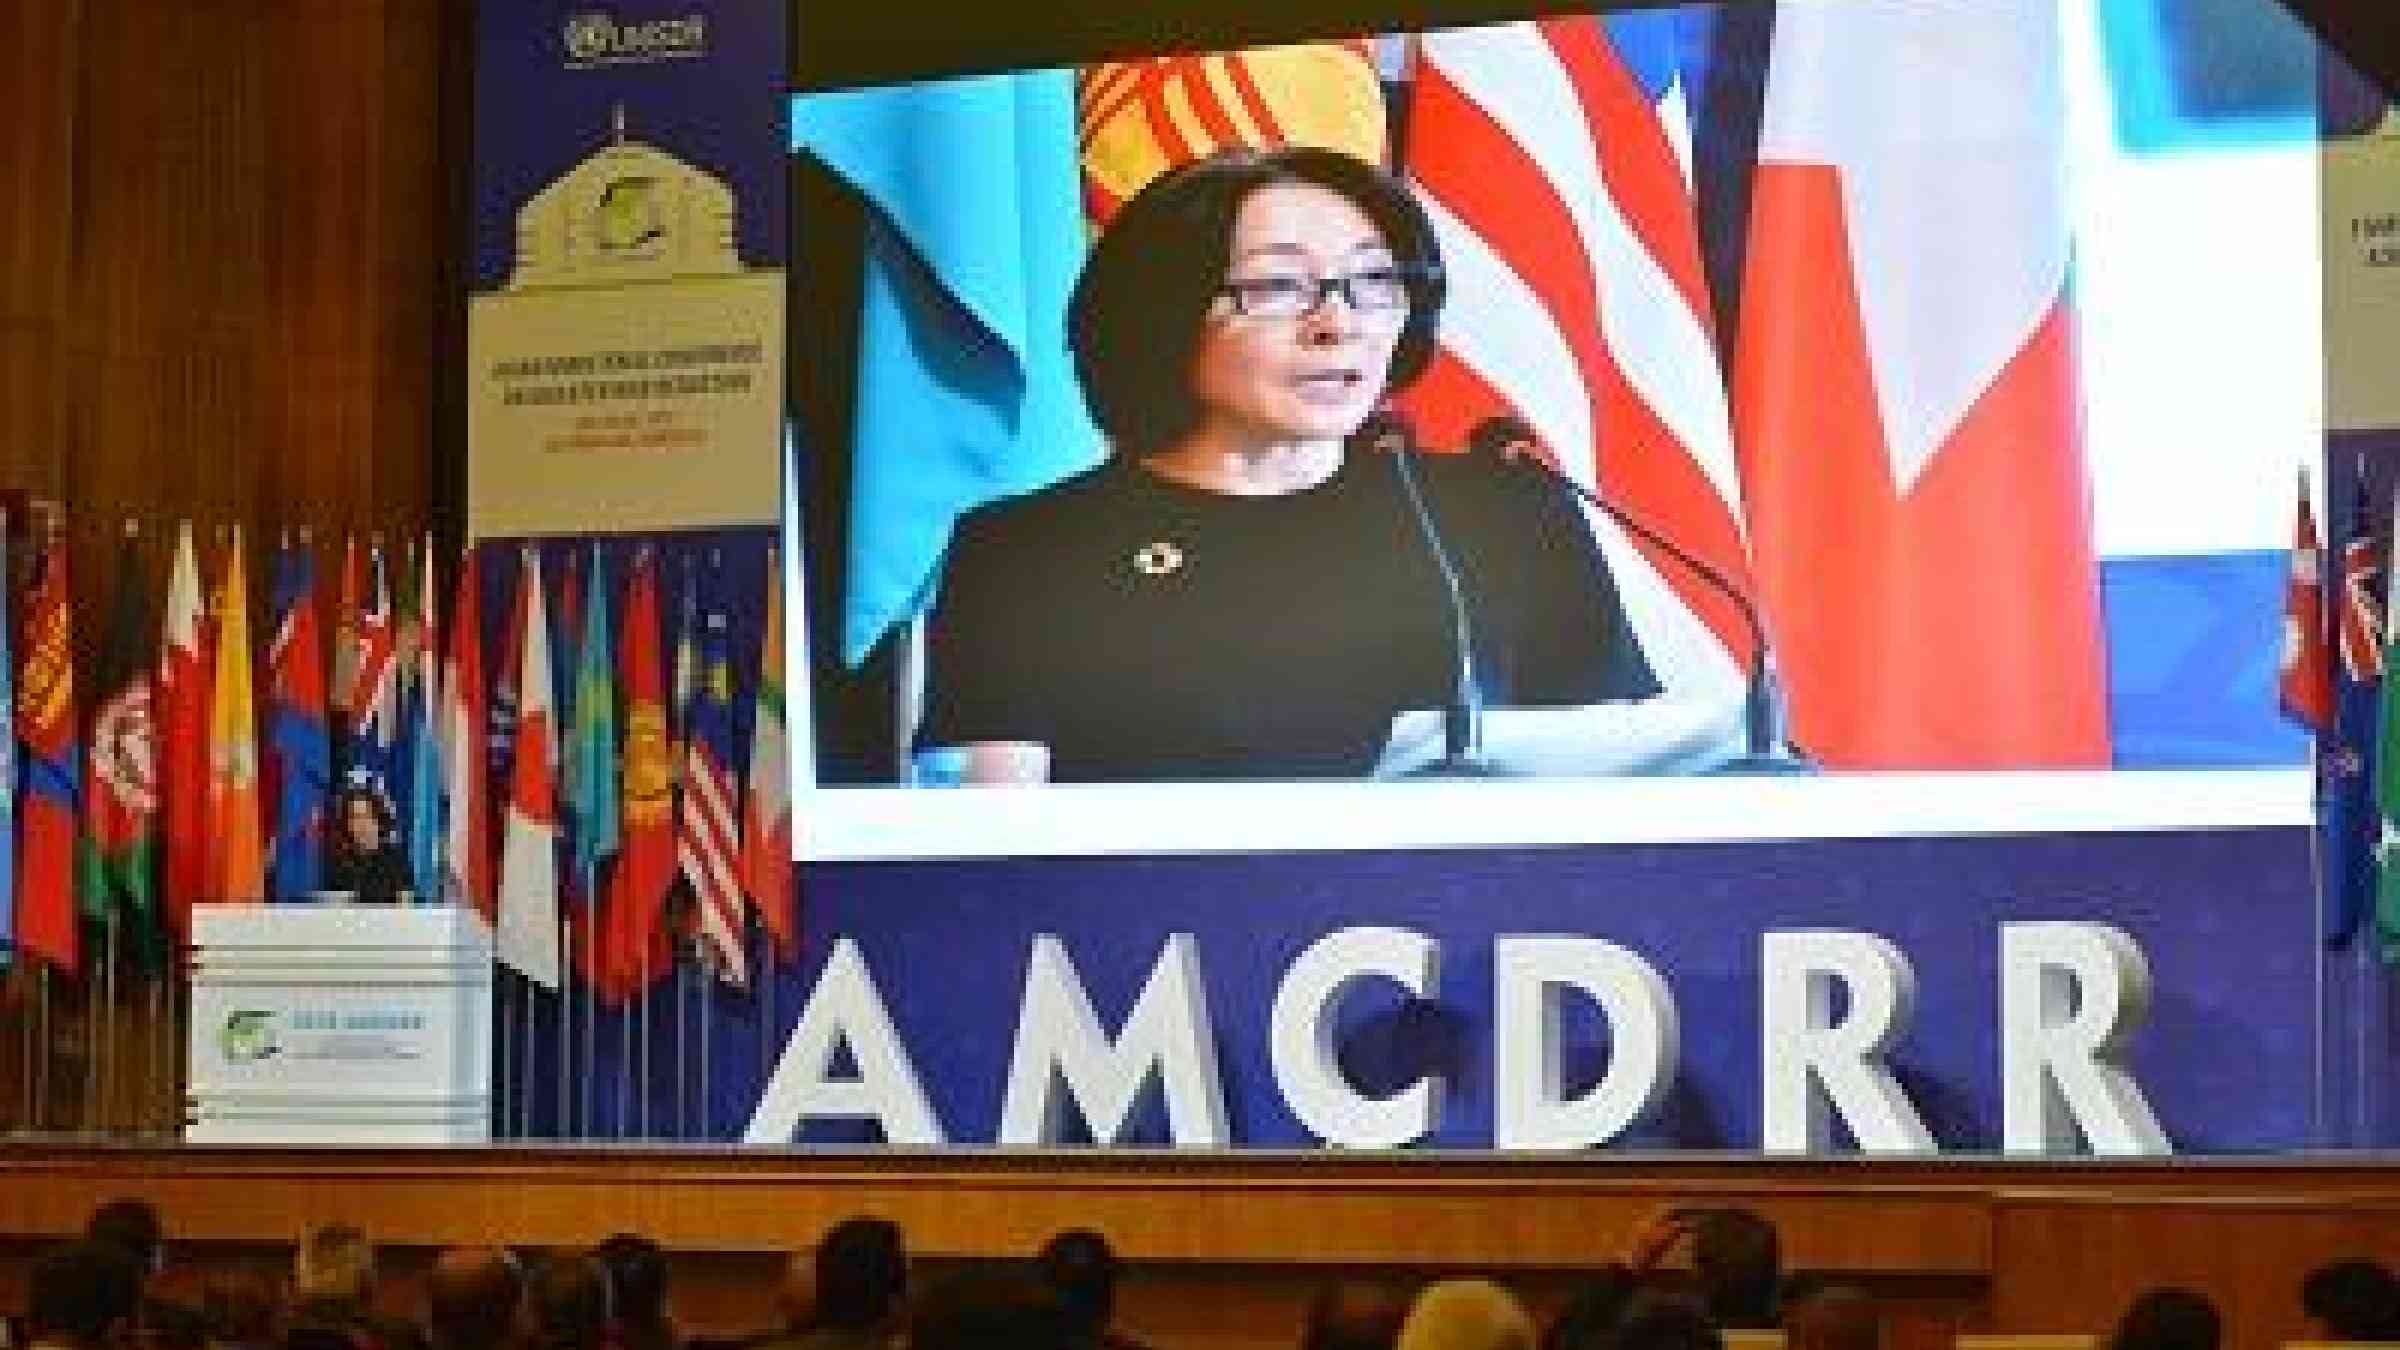 UNISDR head Mami Mizutori told the opening of AMCDRR that extreme weather events are driving disaster displacement in the region